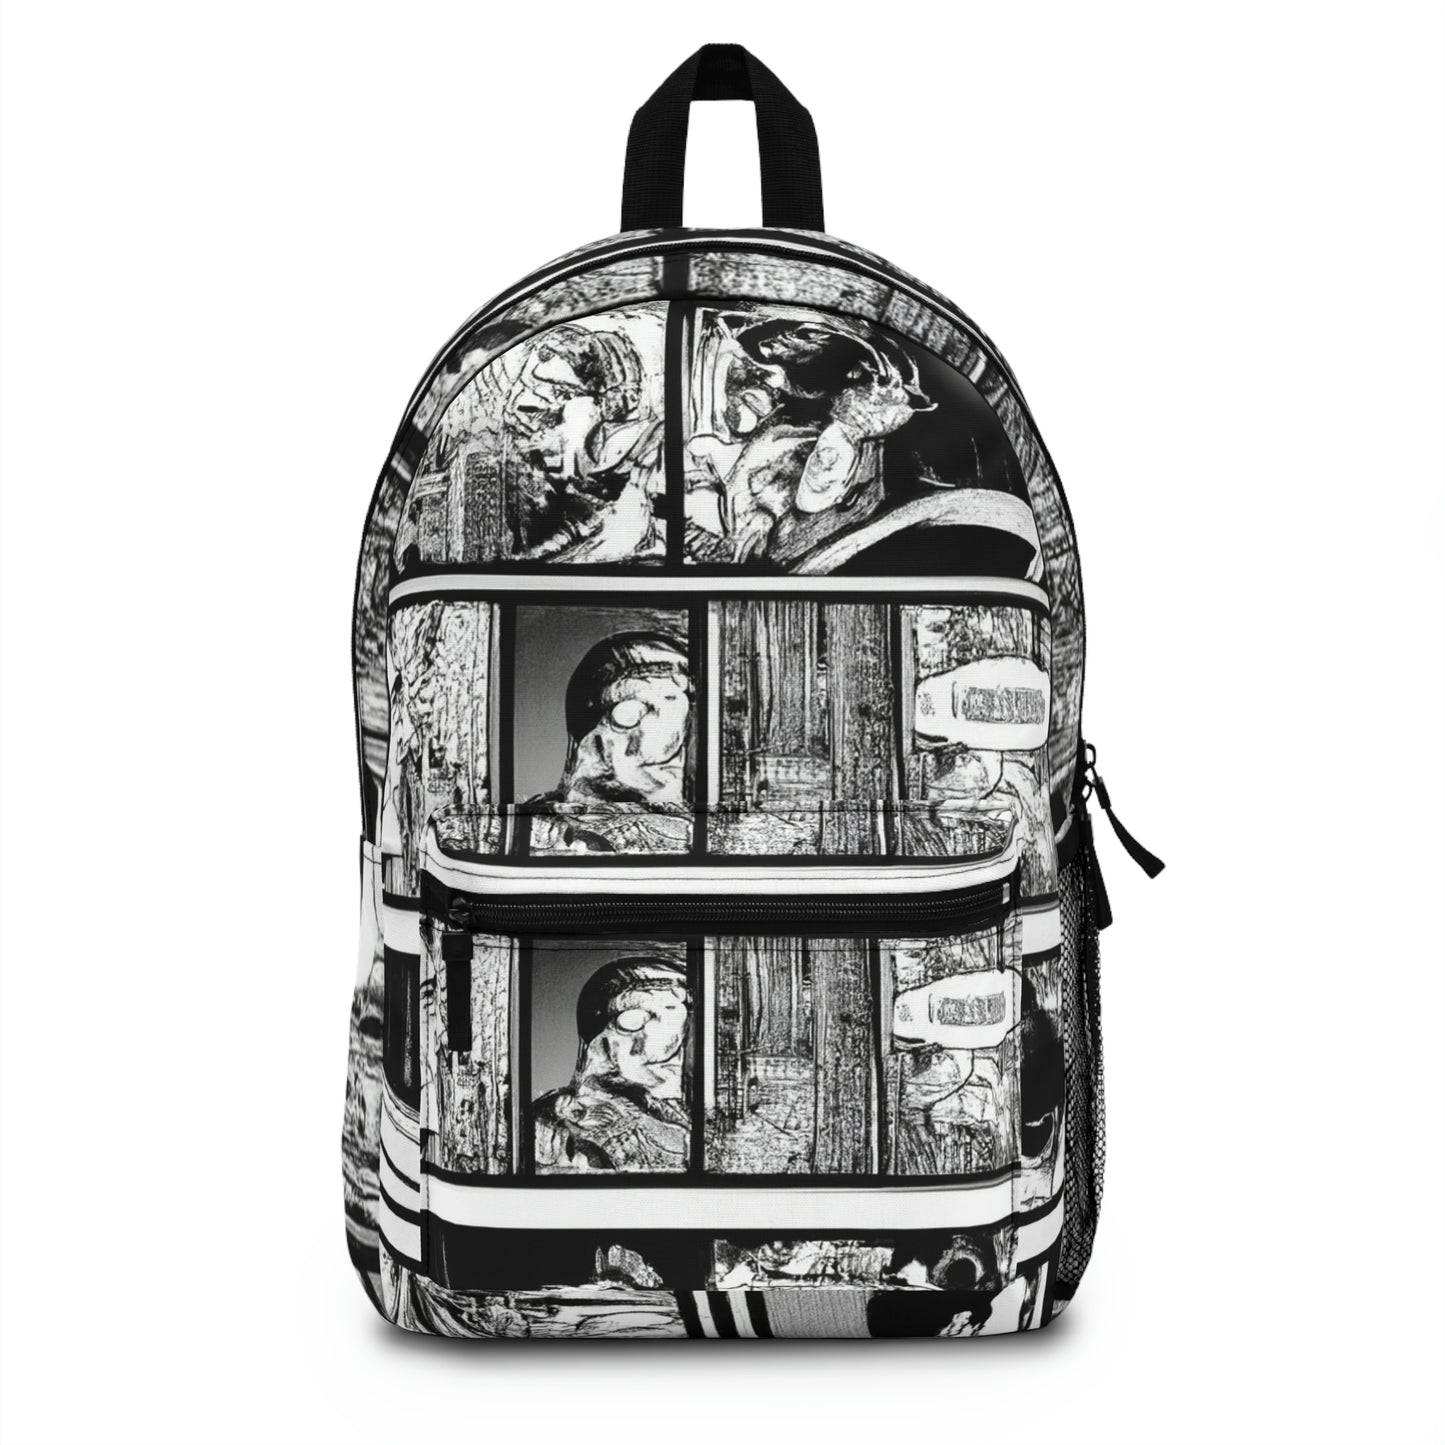 Captain Radiant - Comic Book Backpack